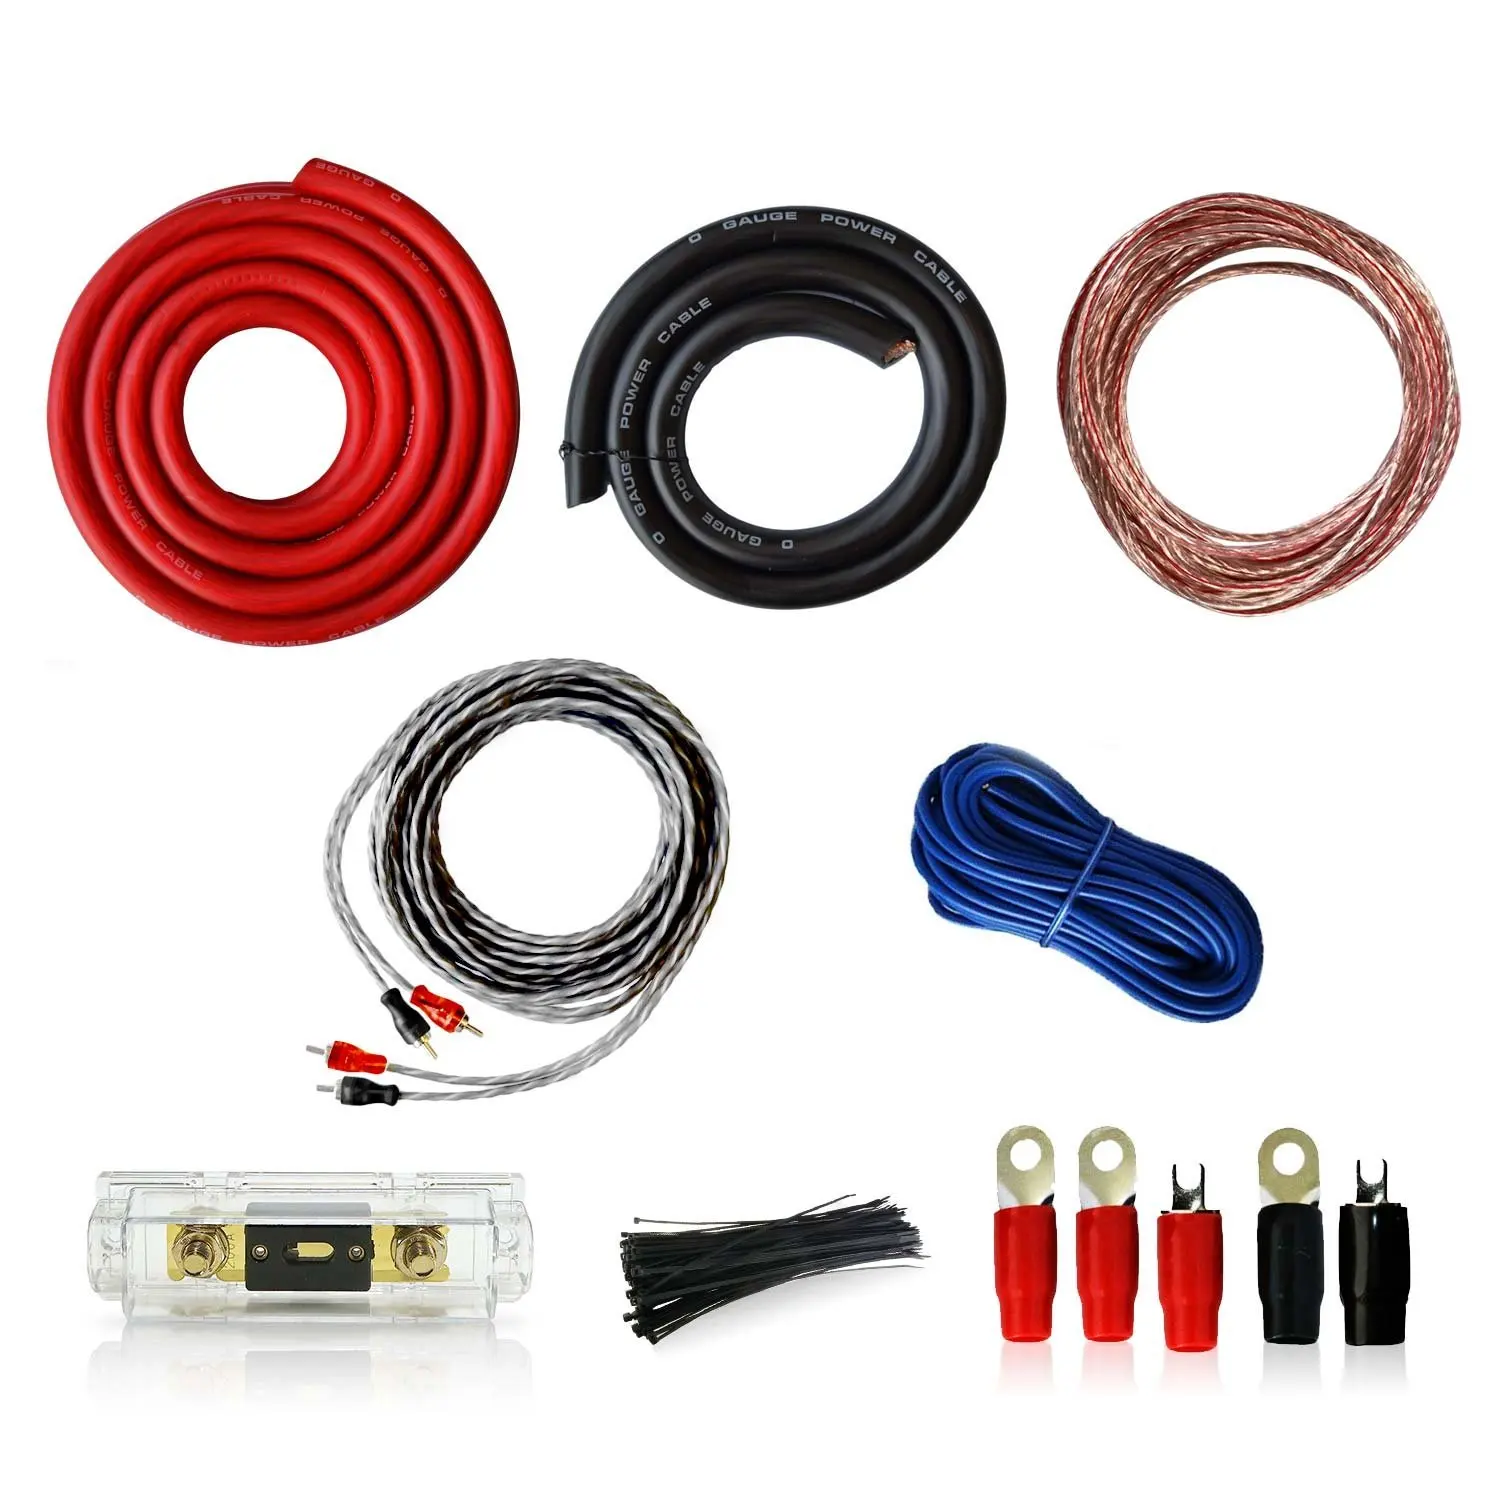 Connects2 CT35-0AWG 3600 watt Complete 0 awg Gauge Car Amplifier Amp Wiring Kit